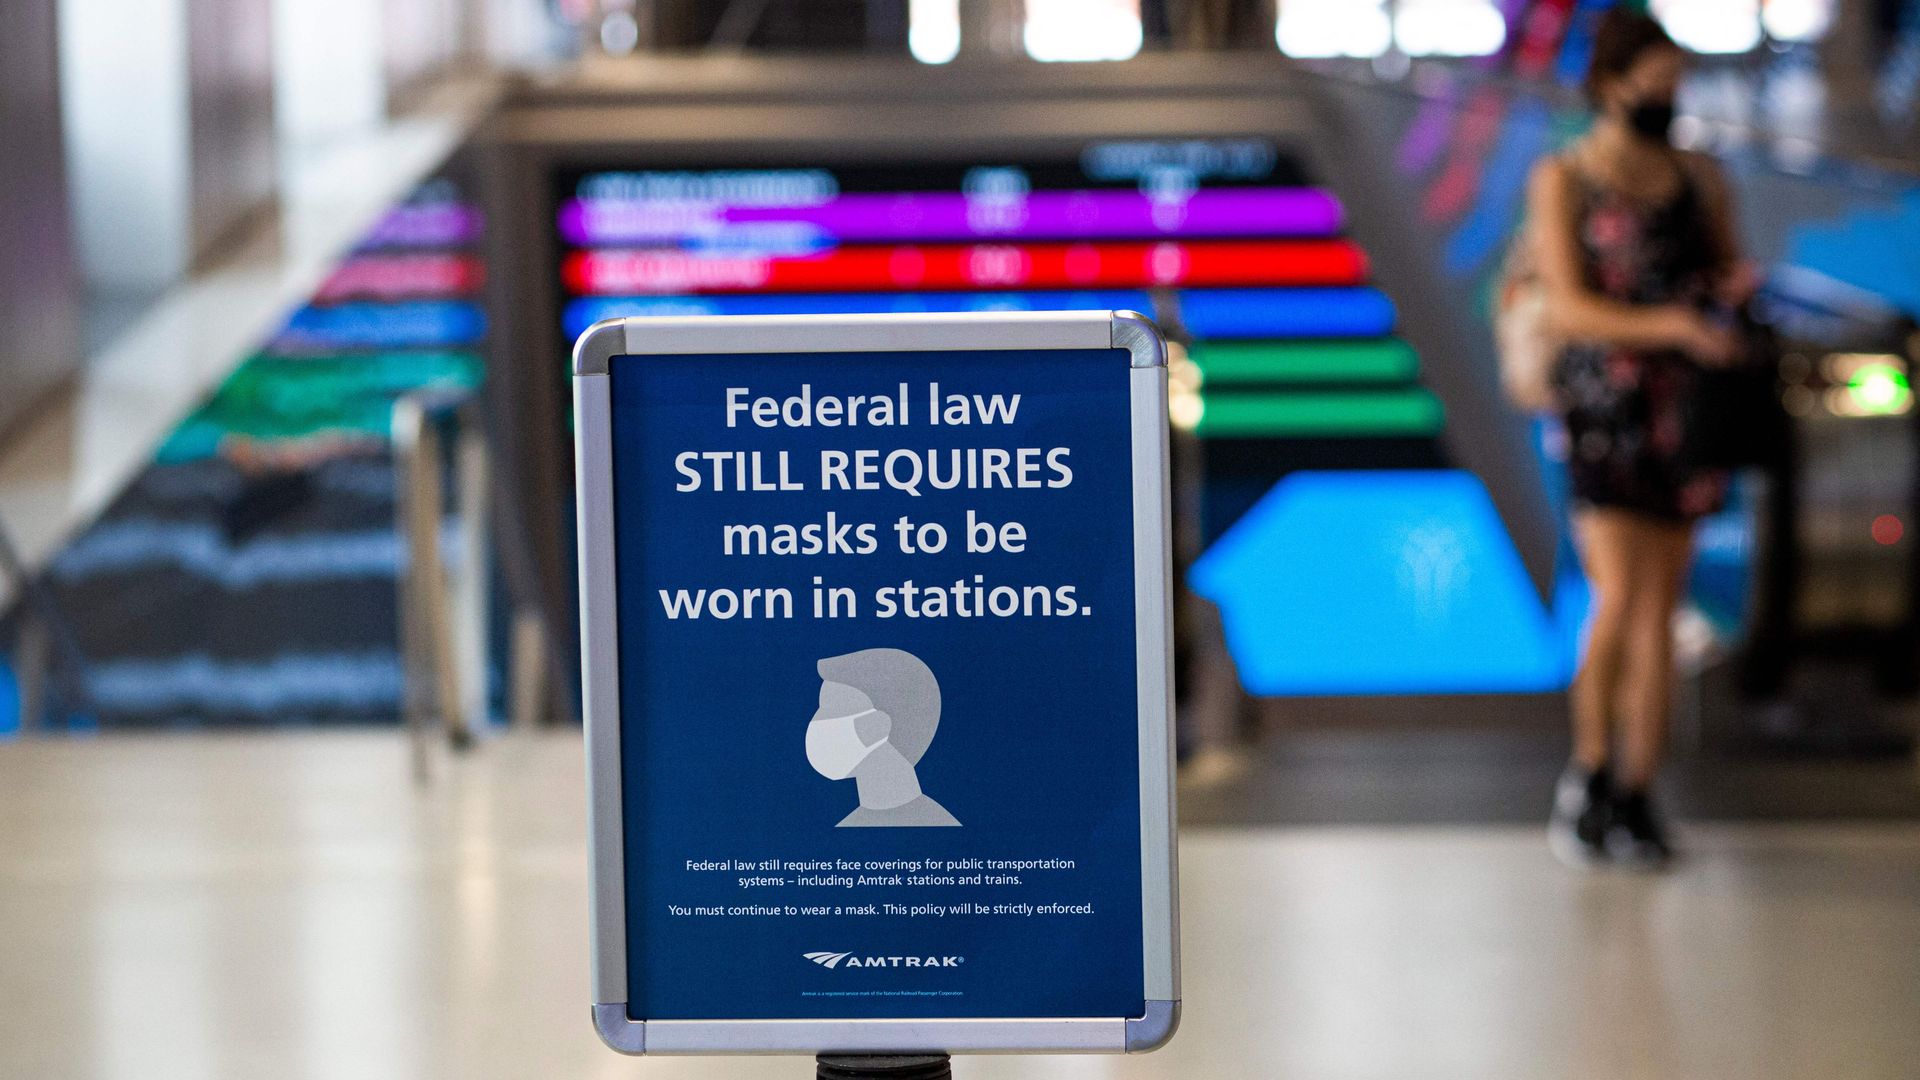 A woman walks past a sign calling for mask wearing at Penn station in New York on August 2, 2021.